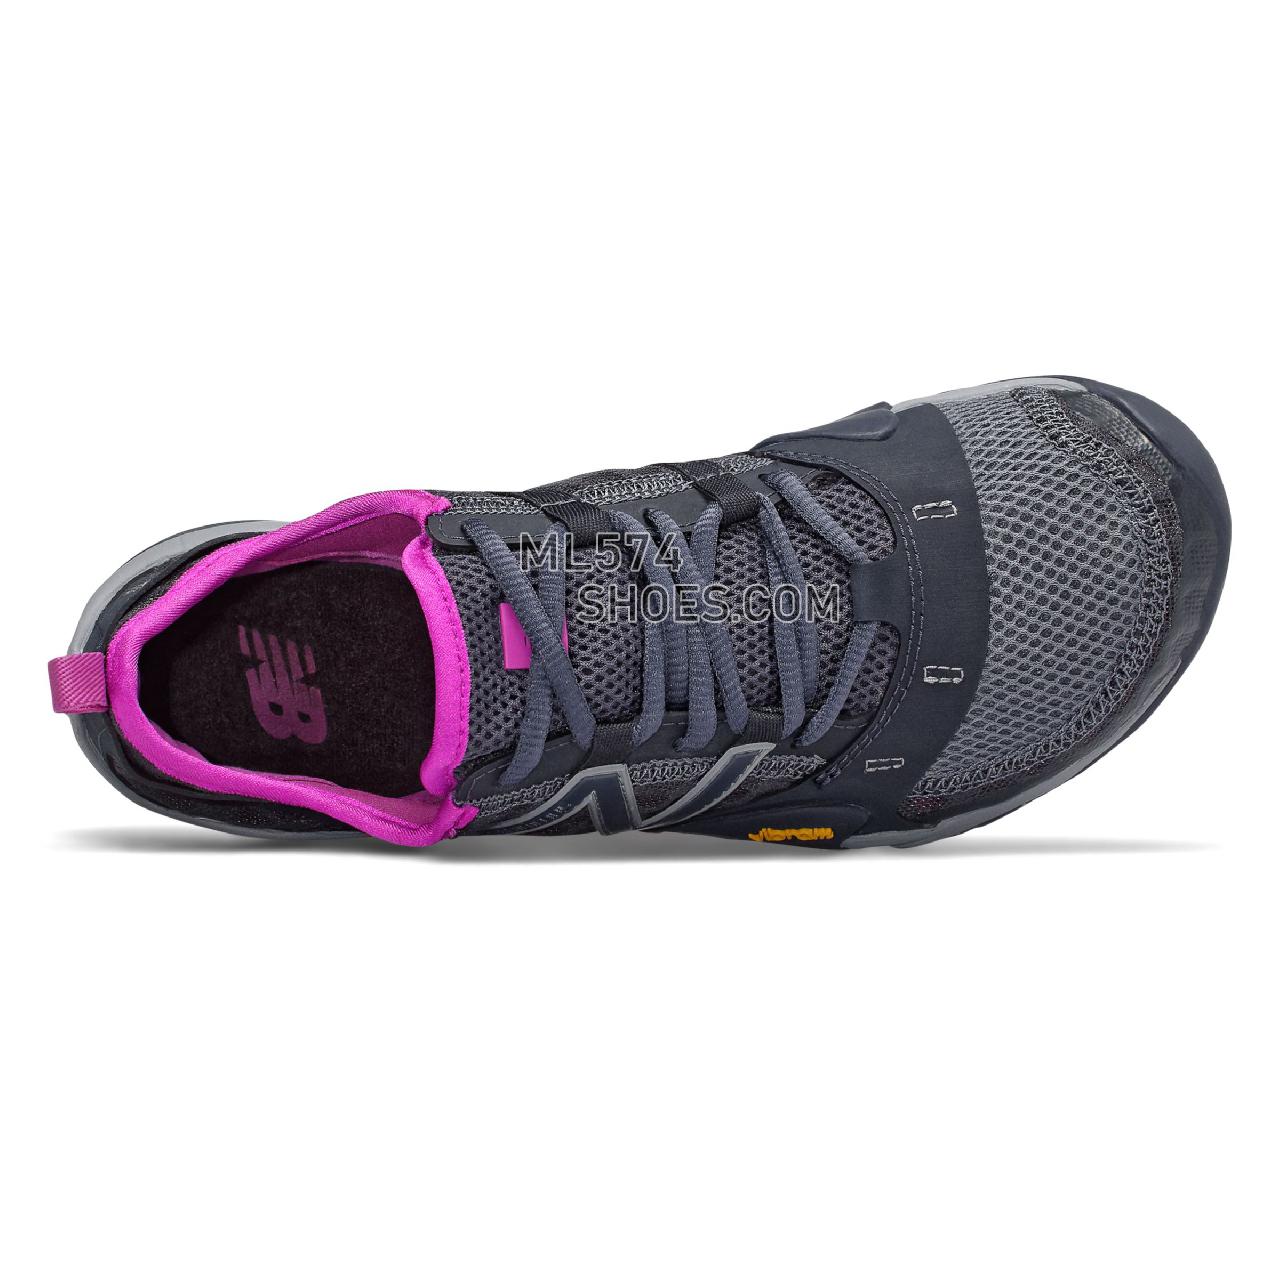 New Balance Minimus Trail 10 - Women's Trail Running - Outerspace with Voltage Violet - WT10VV